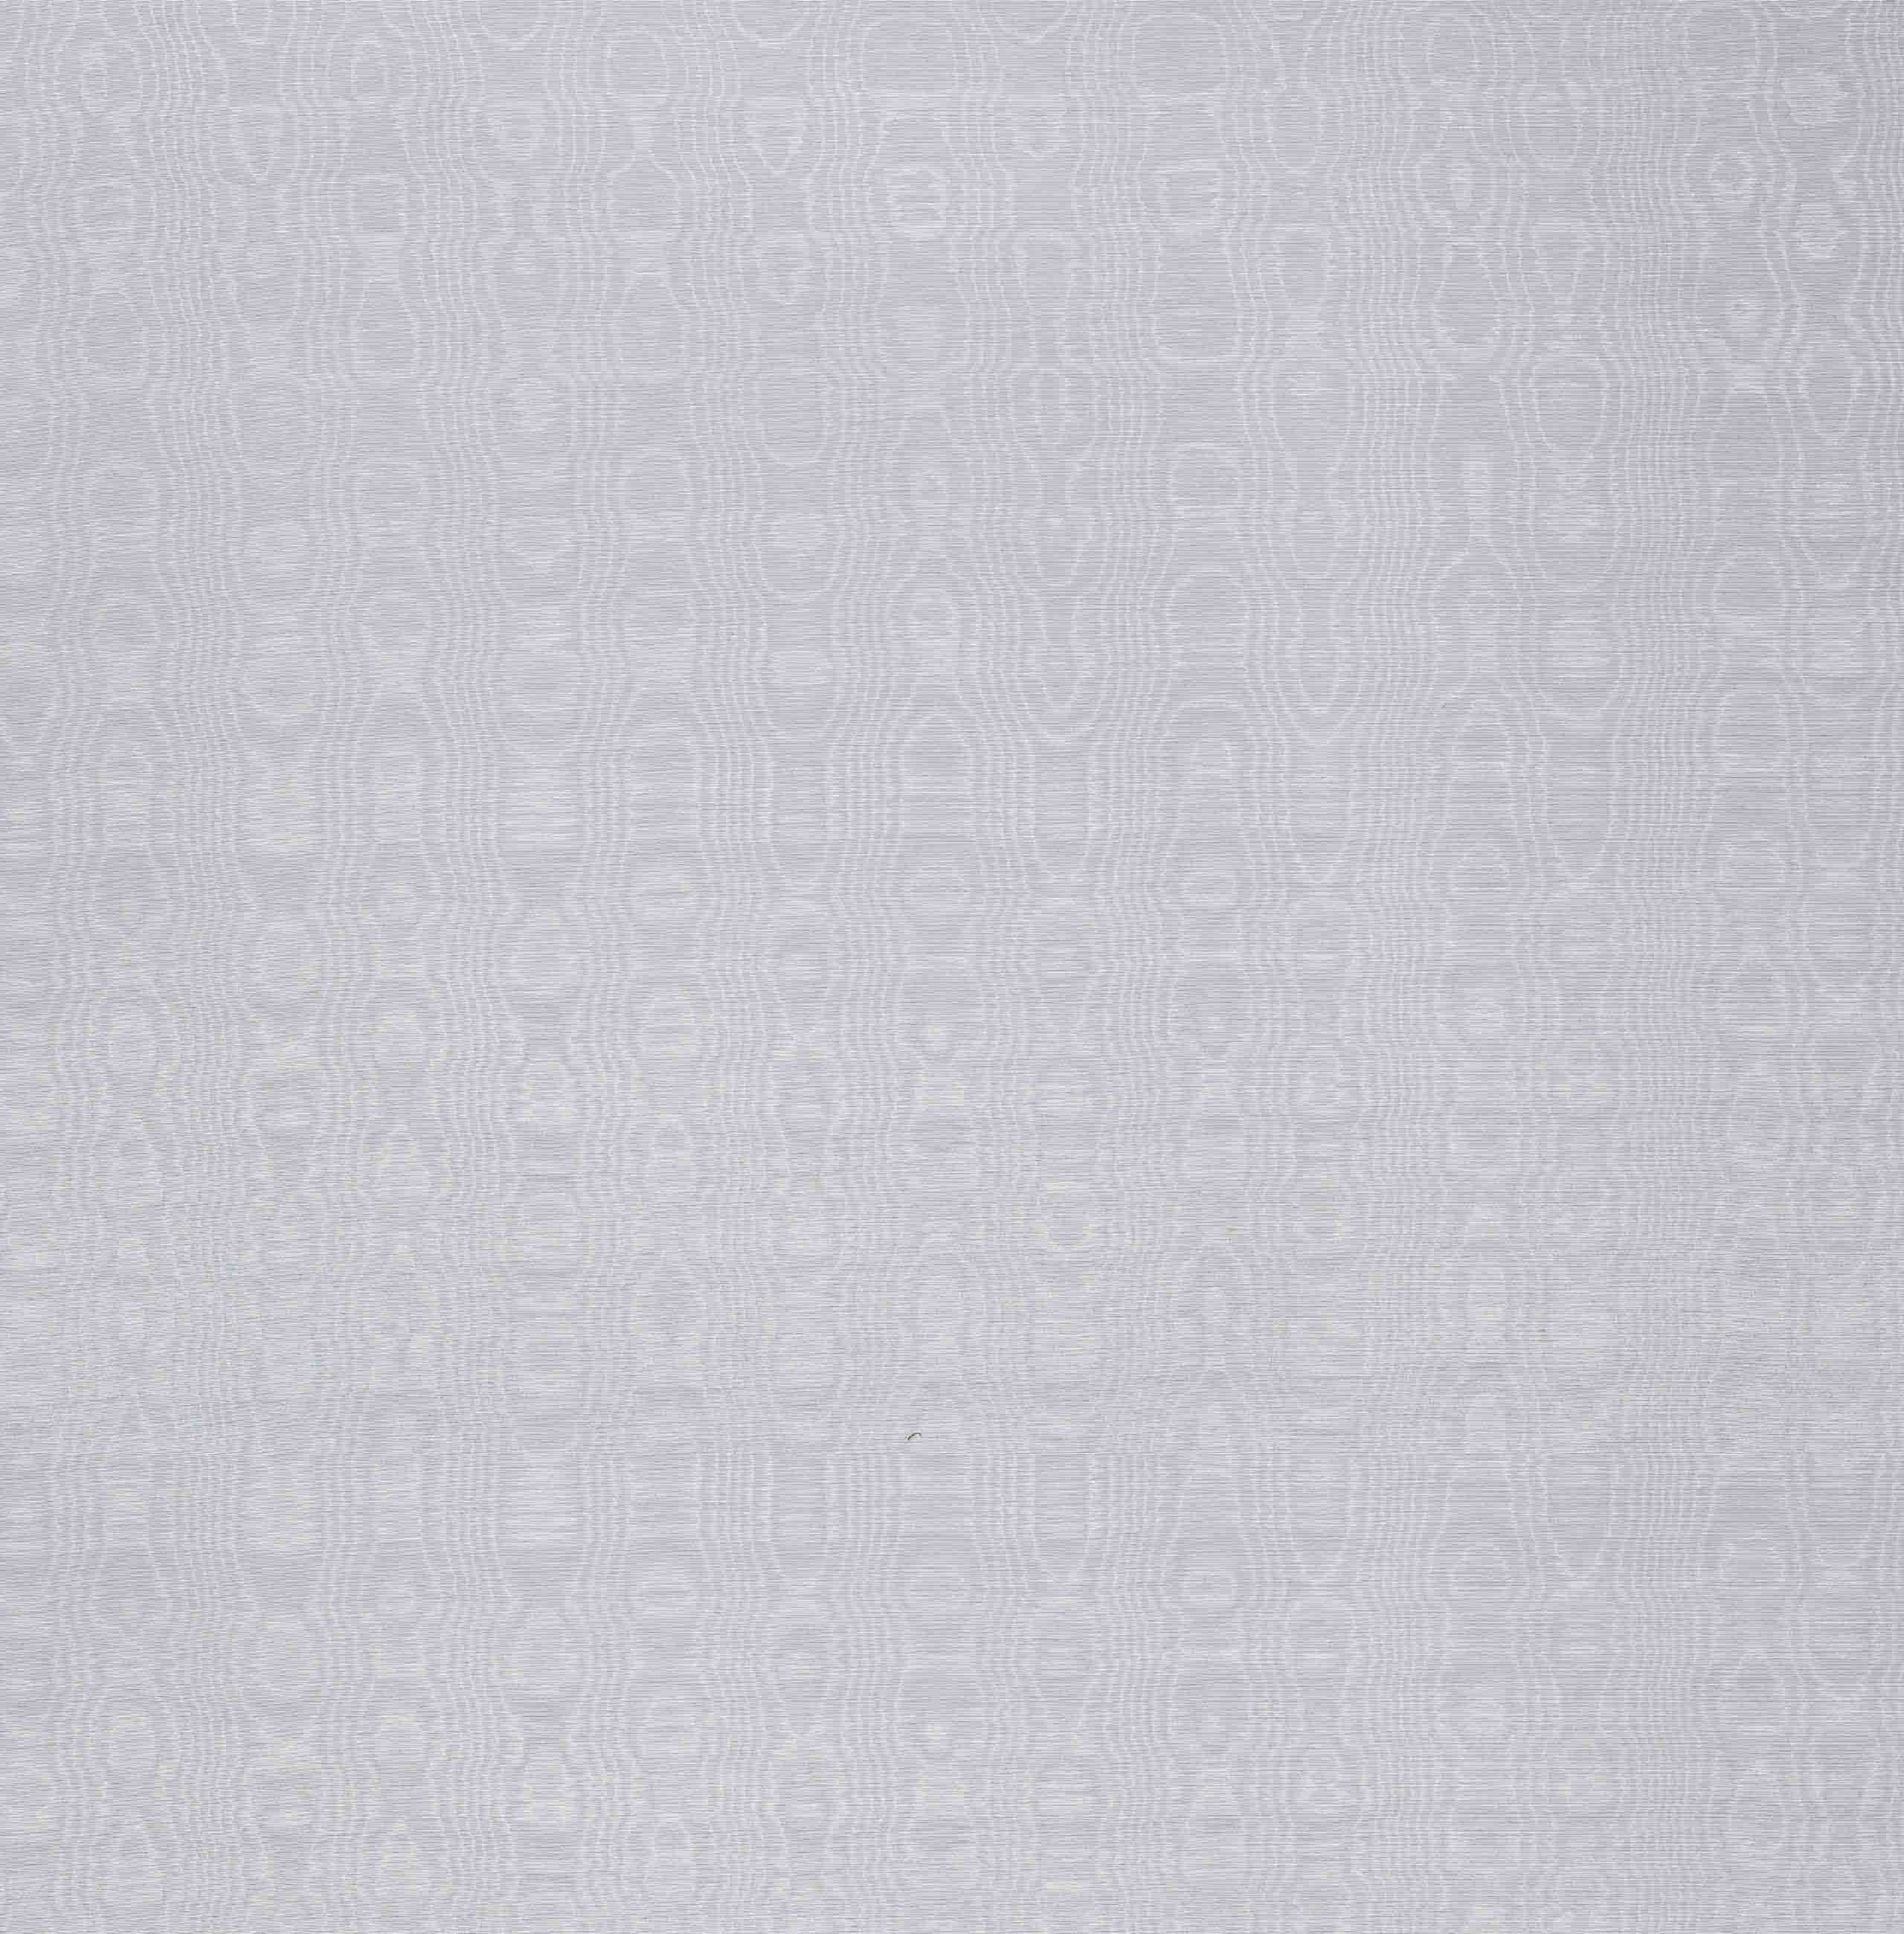 Background silk material